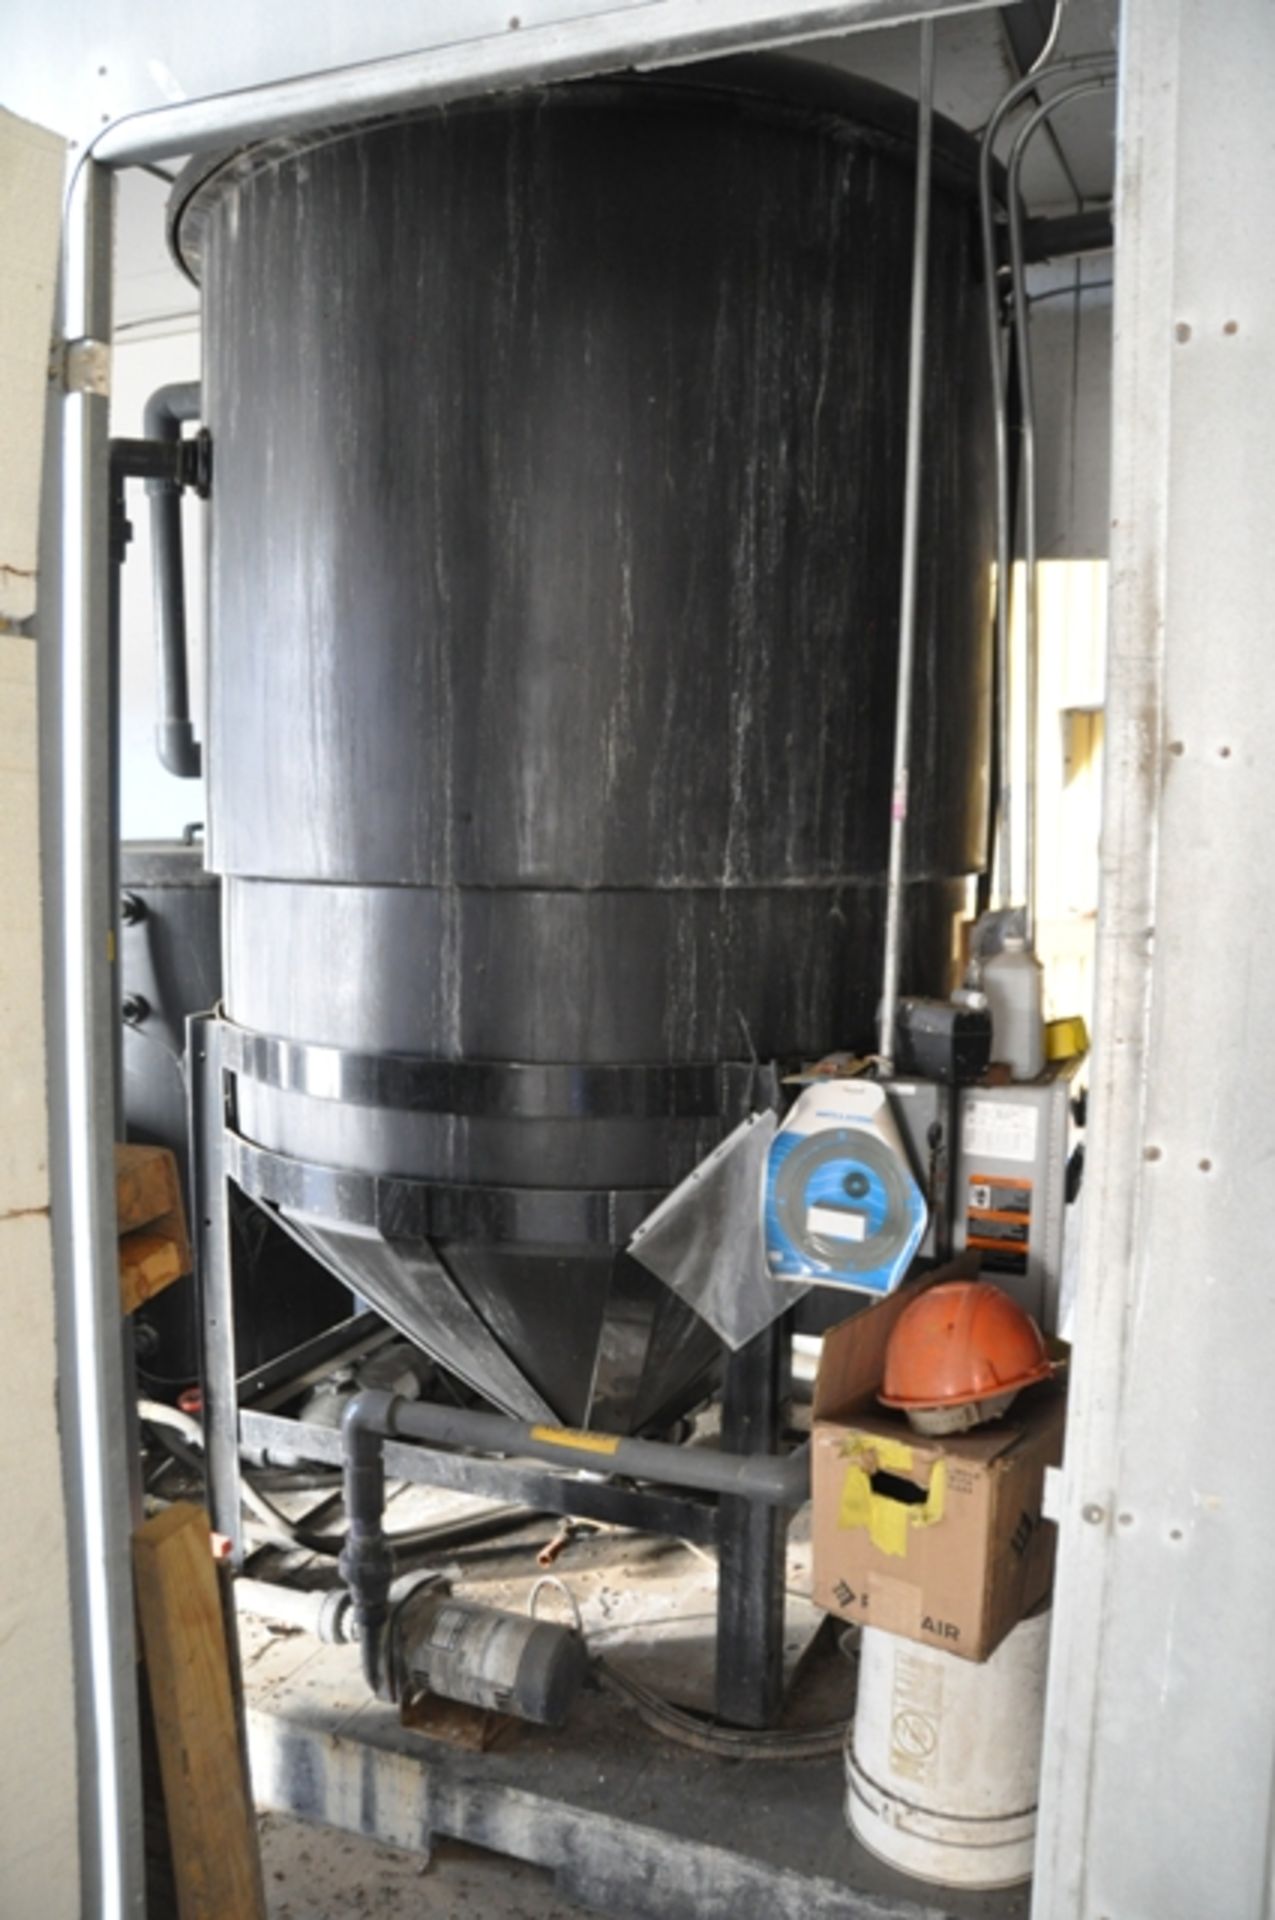 FARROW SYSTEMS BLAST SYSTEM, 185 CFM, FOR REMOVAL OF SURFACE COATINGS, VAPOR BLASTOR, SN.2536, - Image 11 of 25